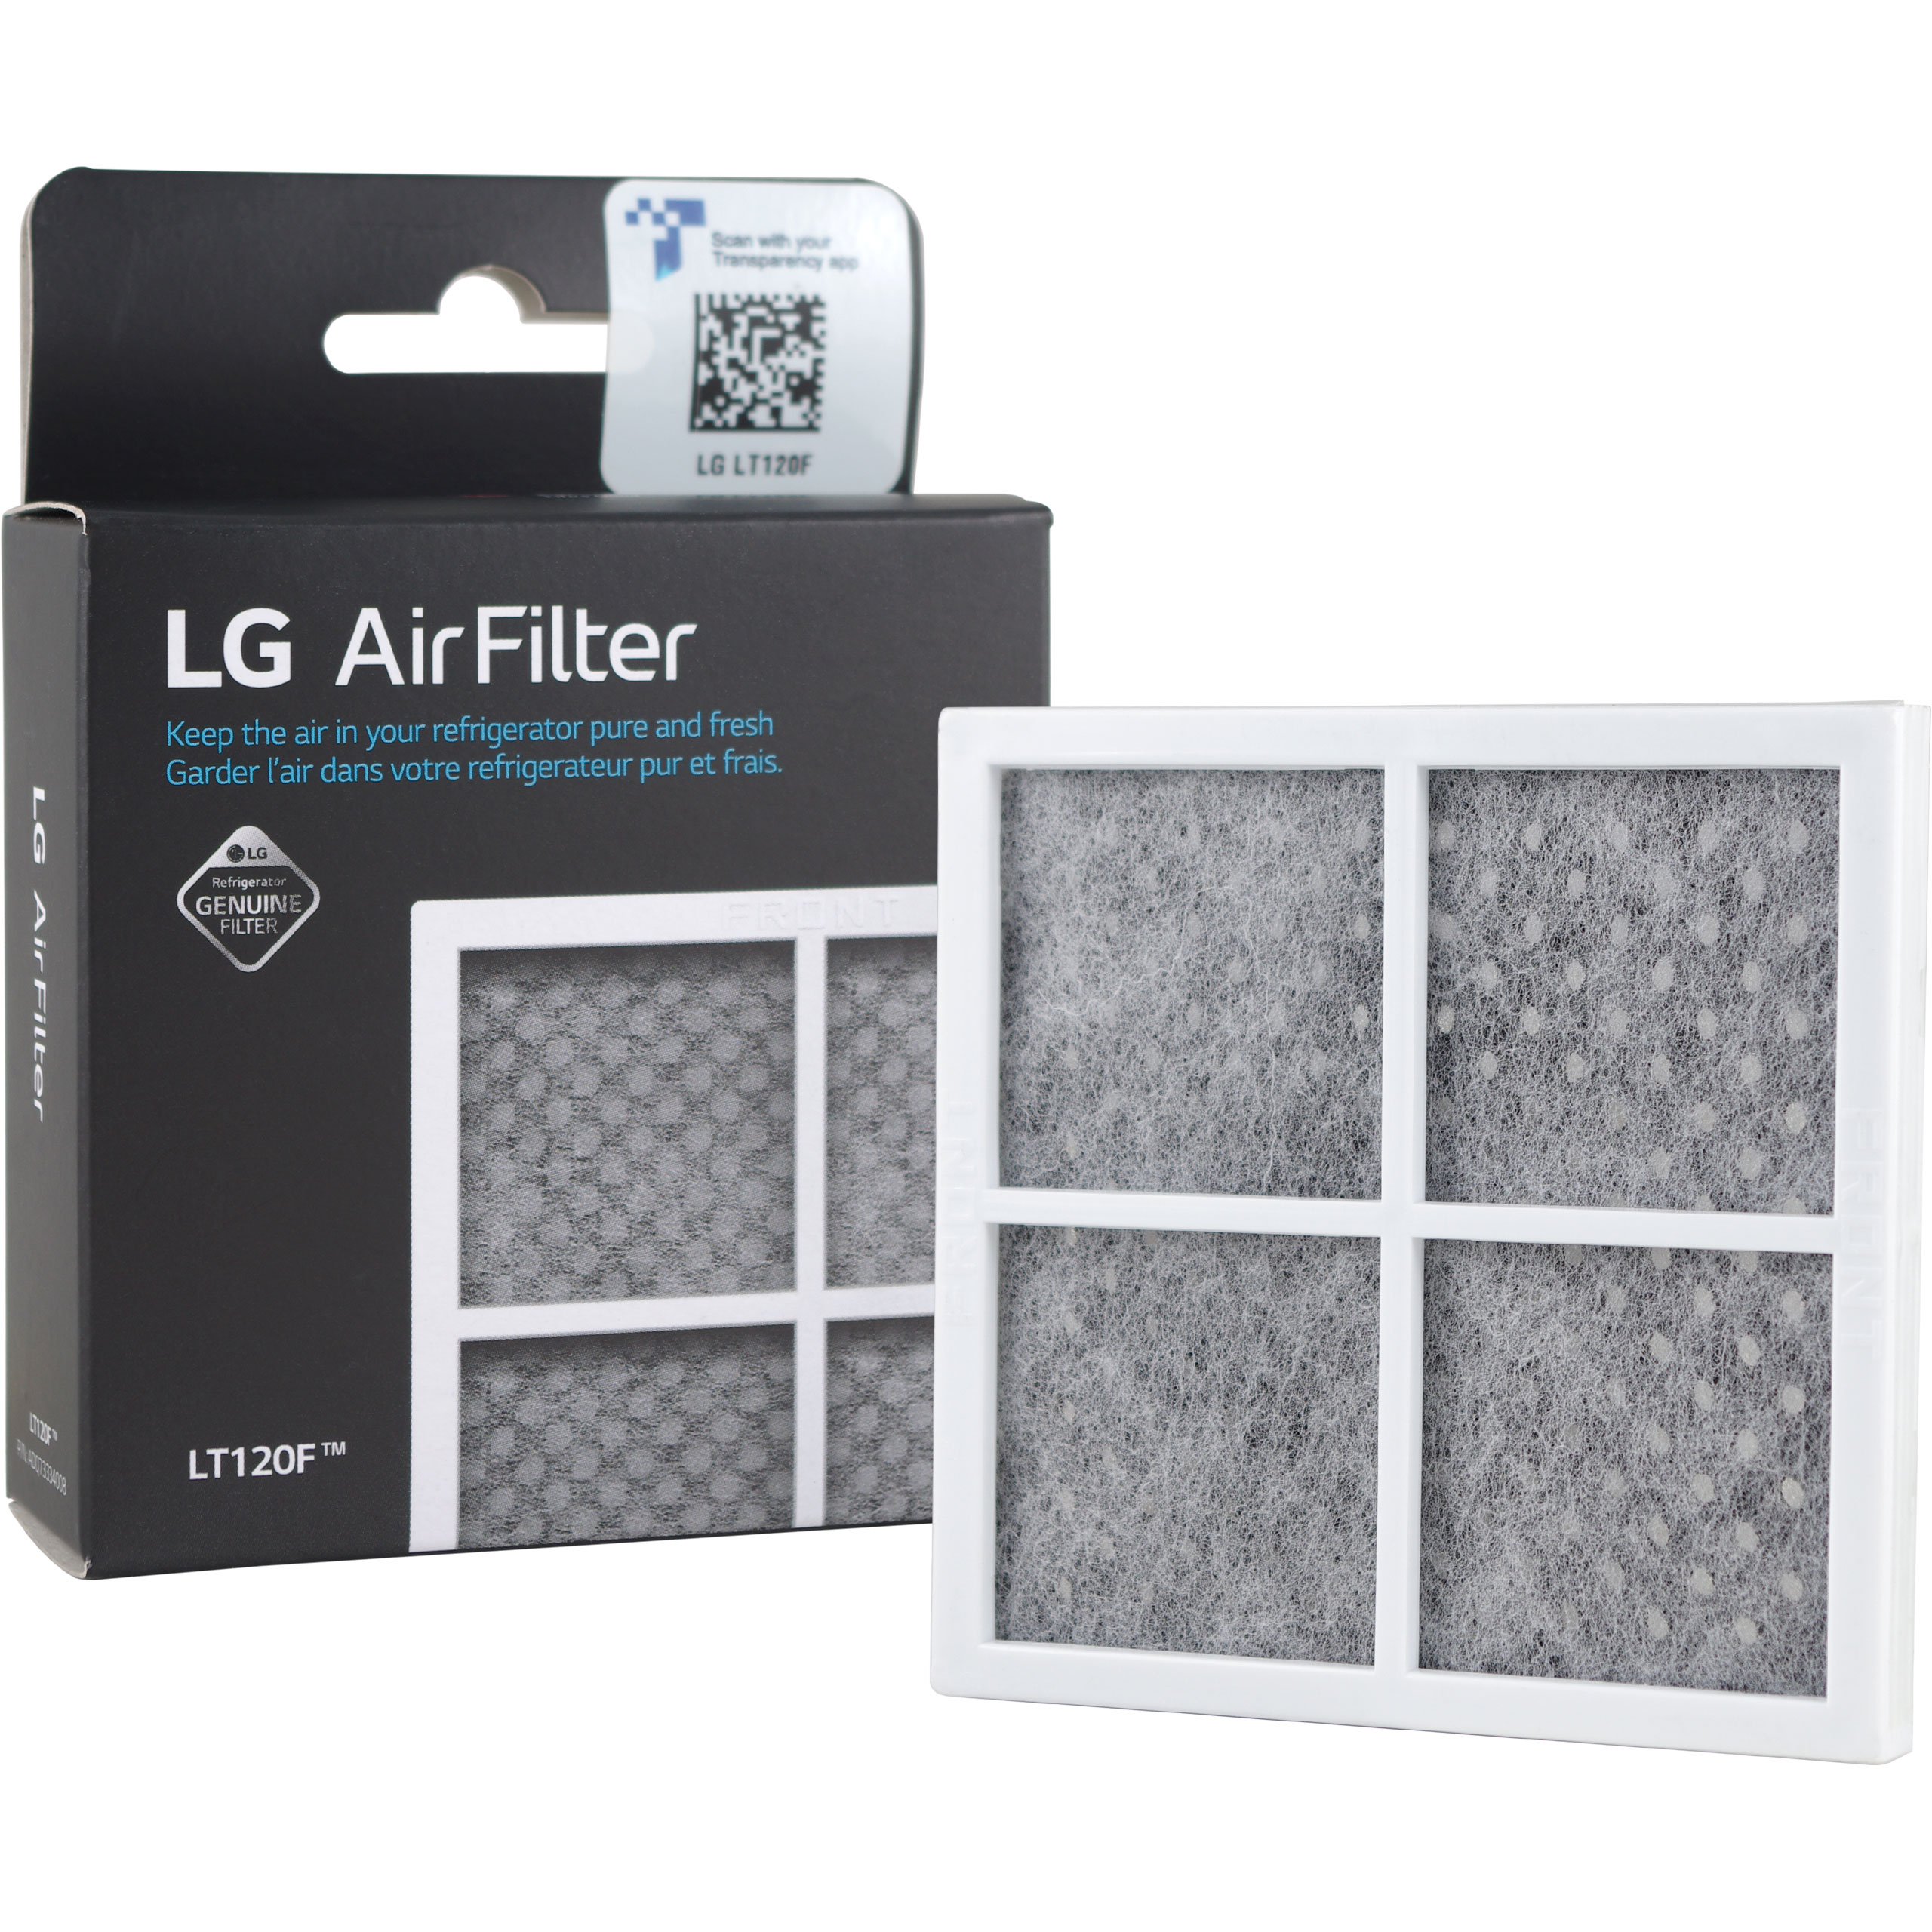 ADQ73334008 Filter Arrowpure Refrigerator Air Filter Replacement for LG LT120F 